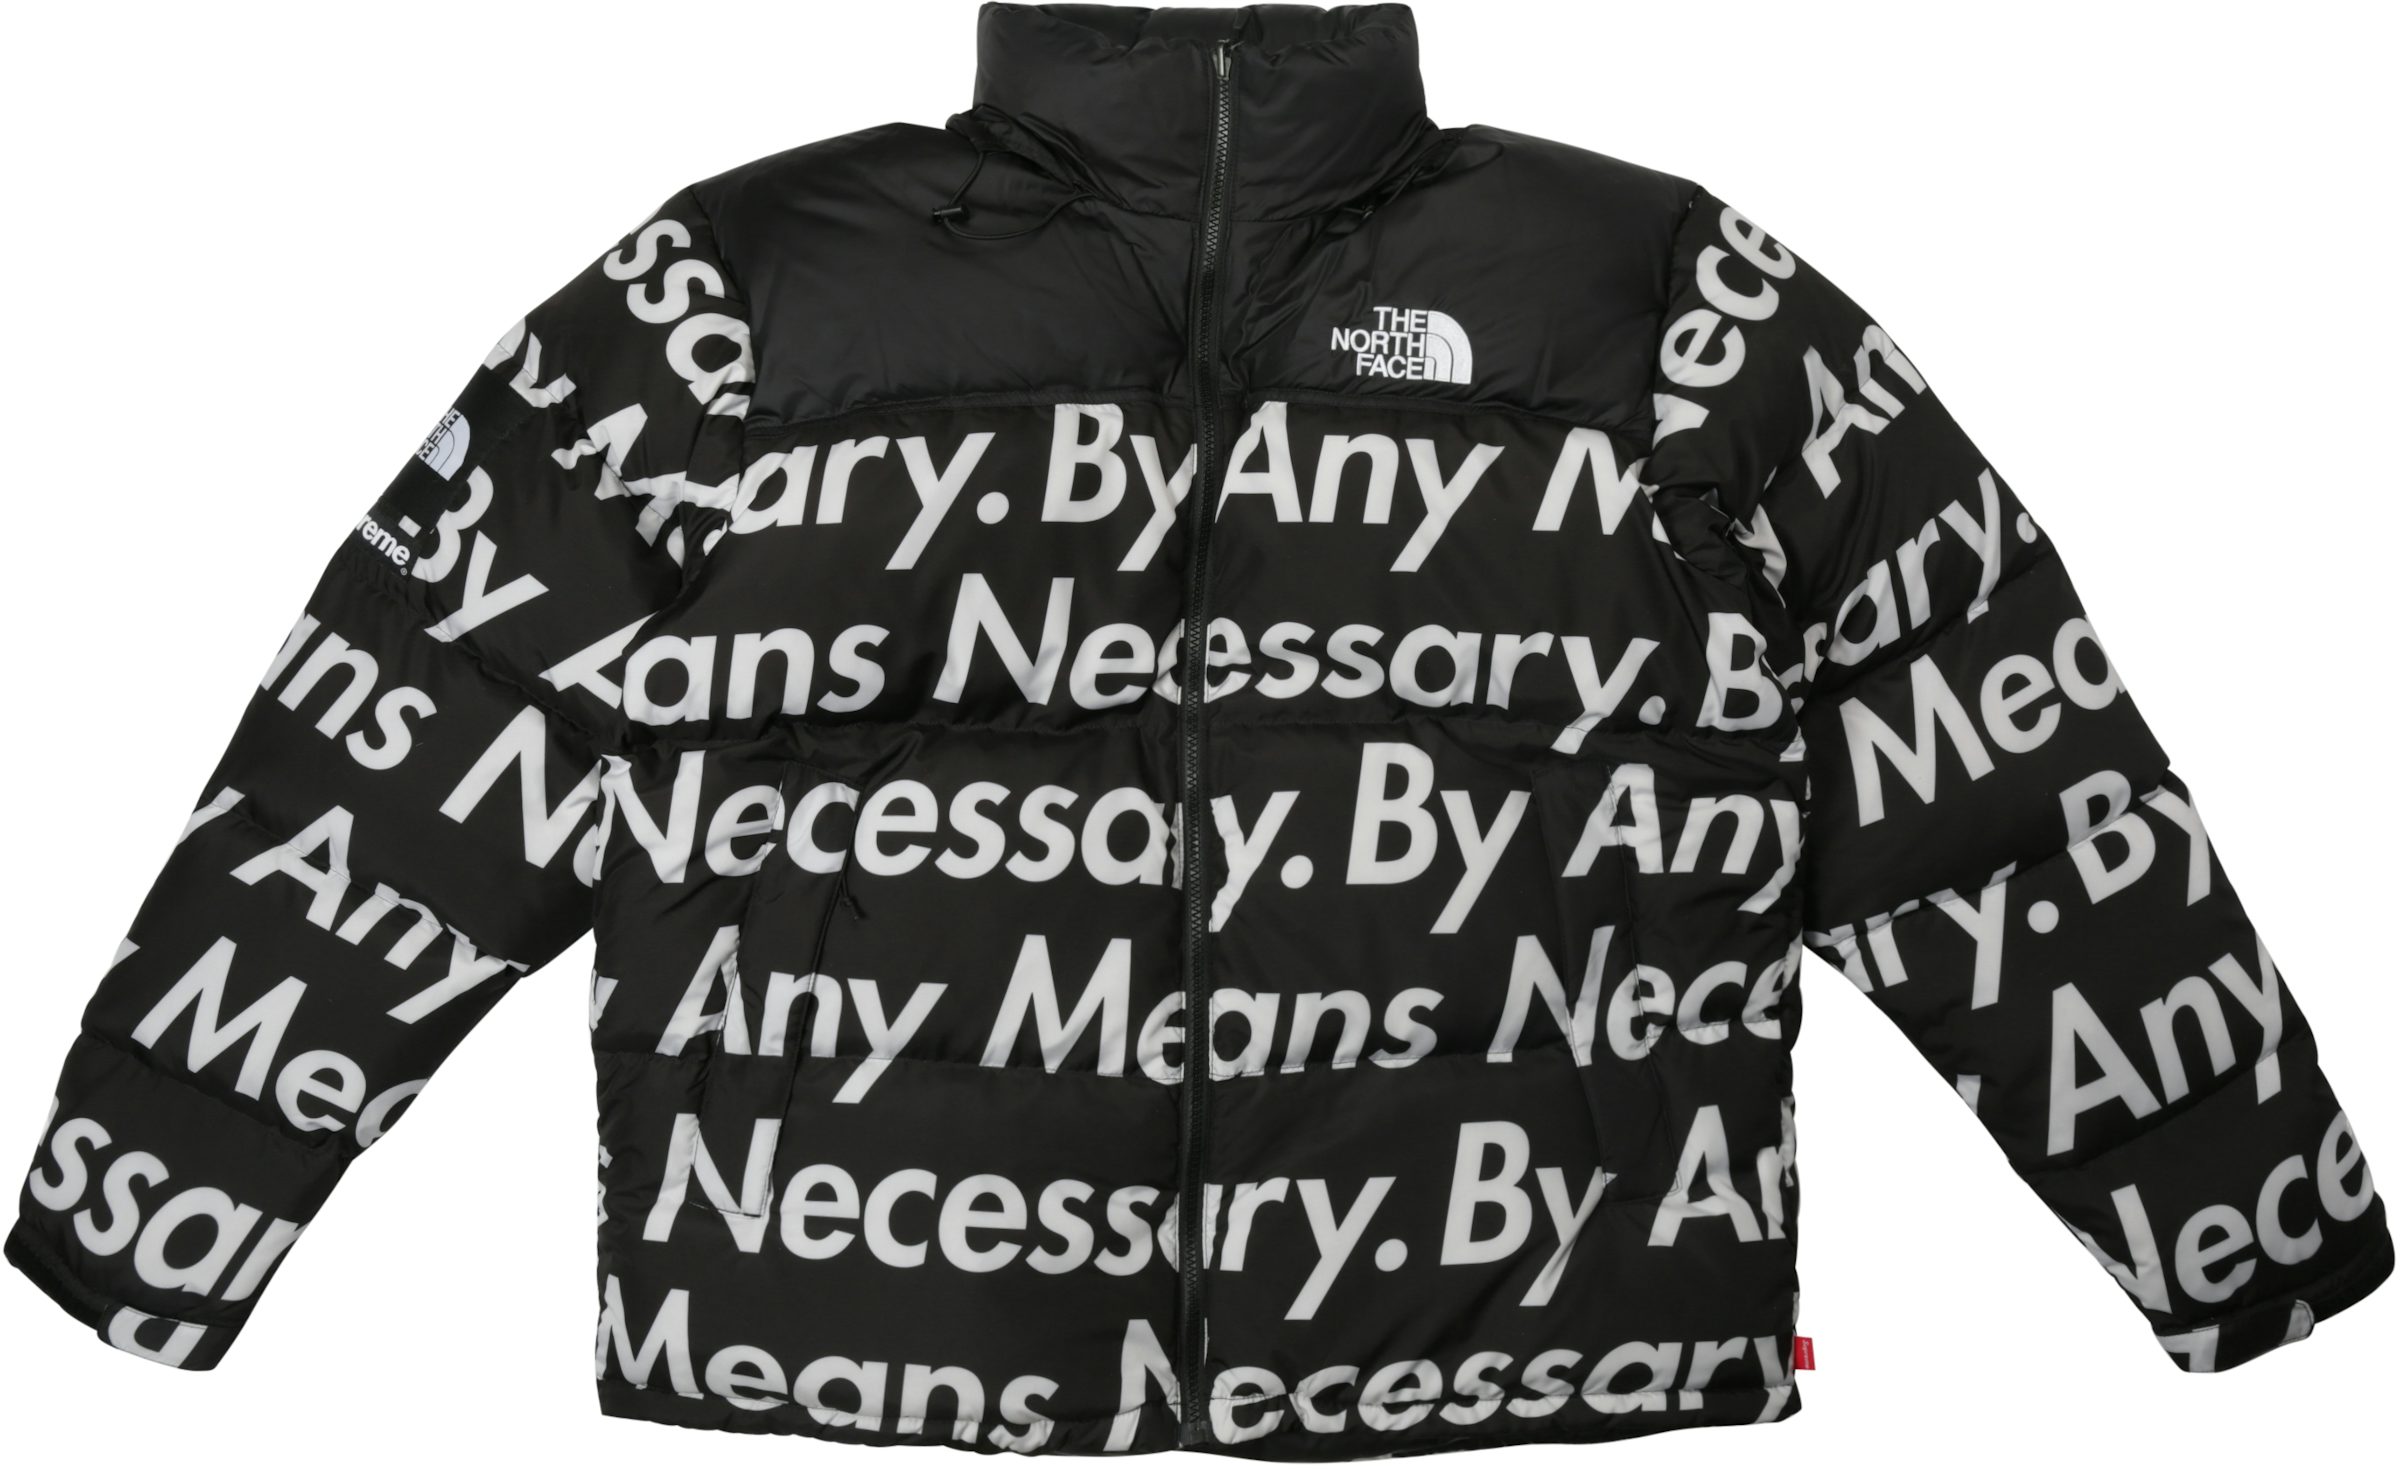 The Face By Any Means Nuptse Jacket Black - FW15 Men's -